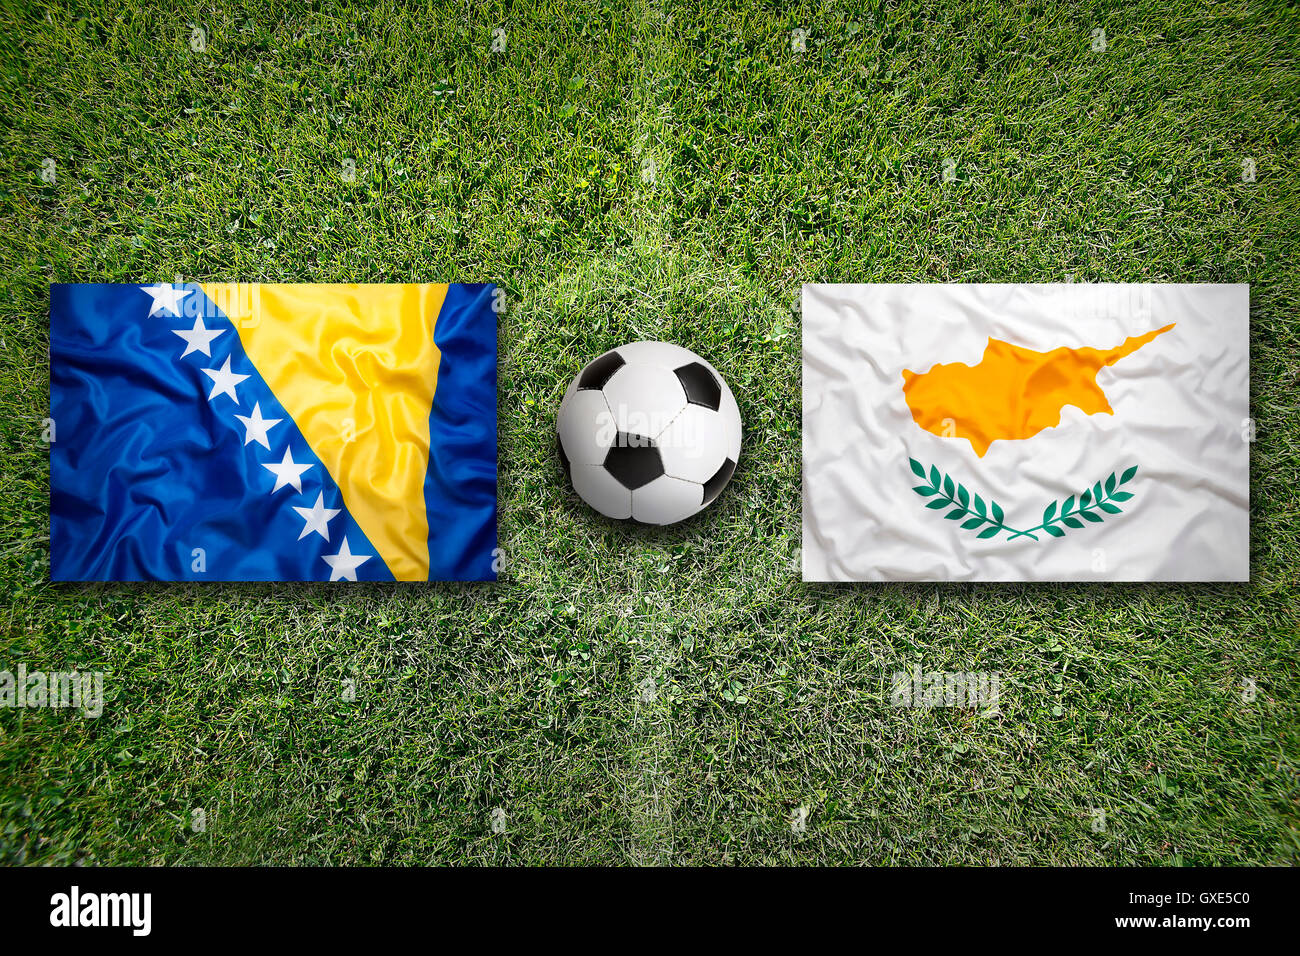 Bosnia and Herzegovina and Cyprus flags on a green soccer field Stock Photo